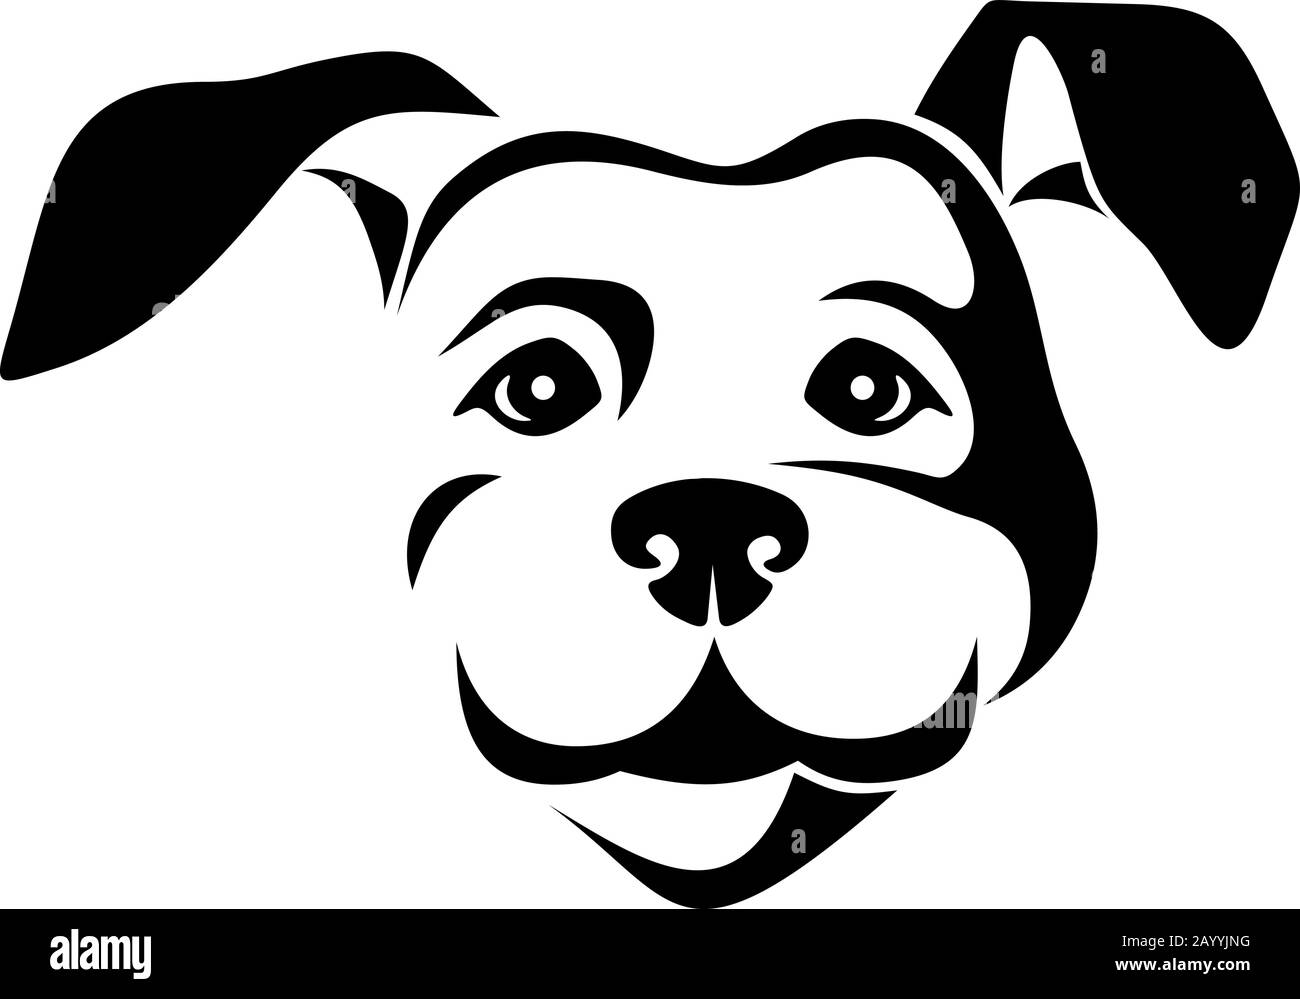 Vector black and white illustration of a dog face isolated on a white background. Stock Vector